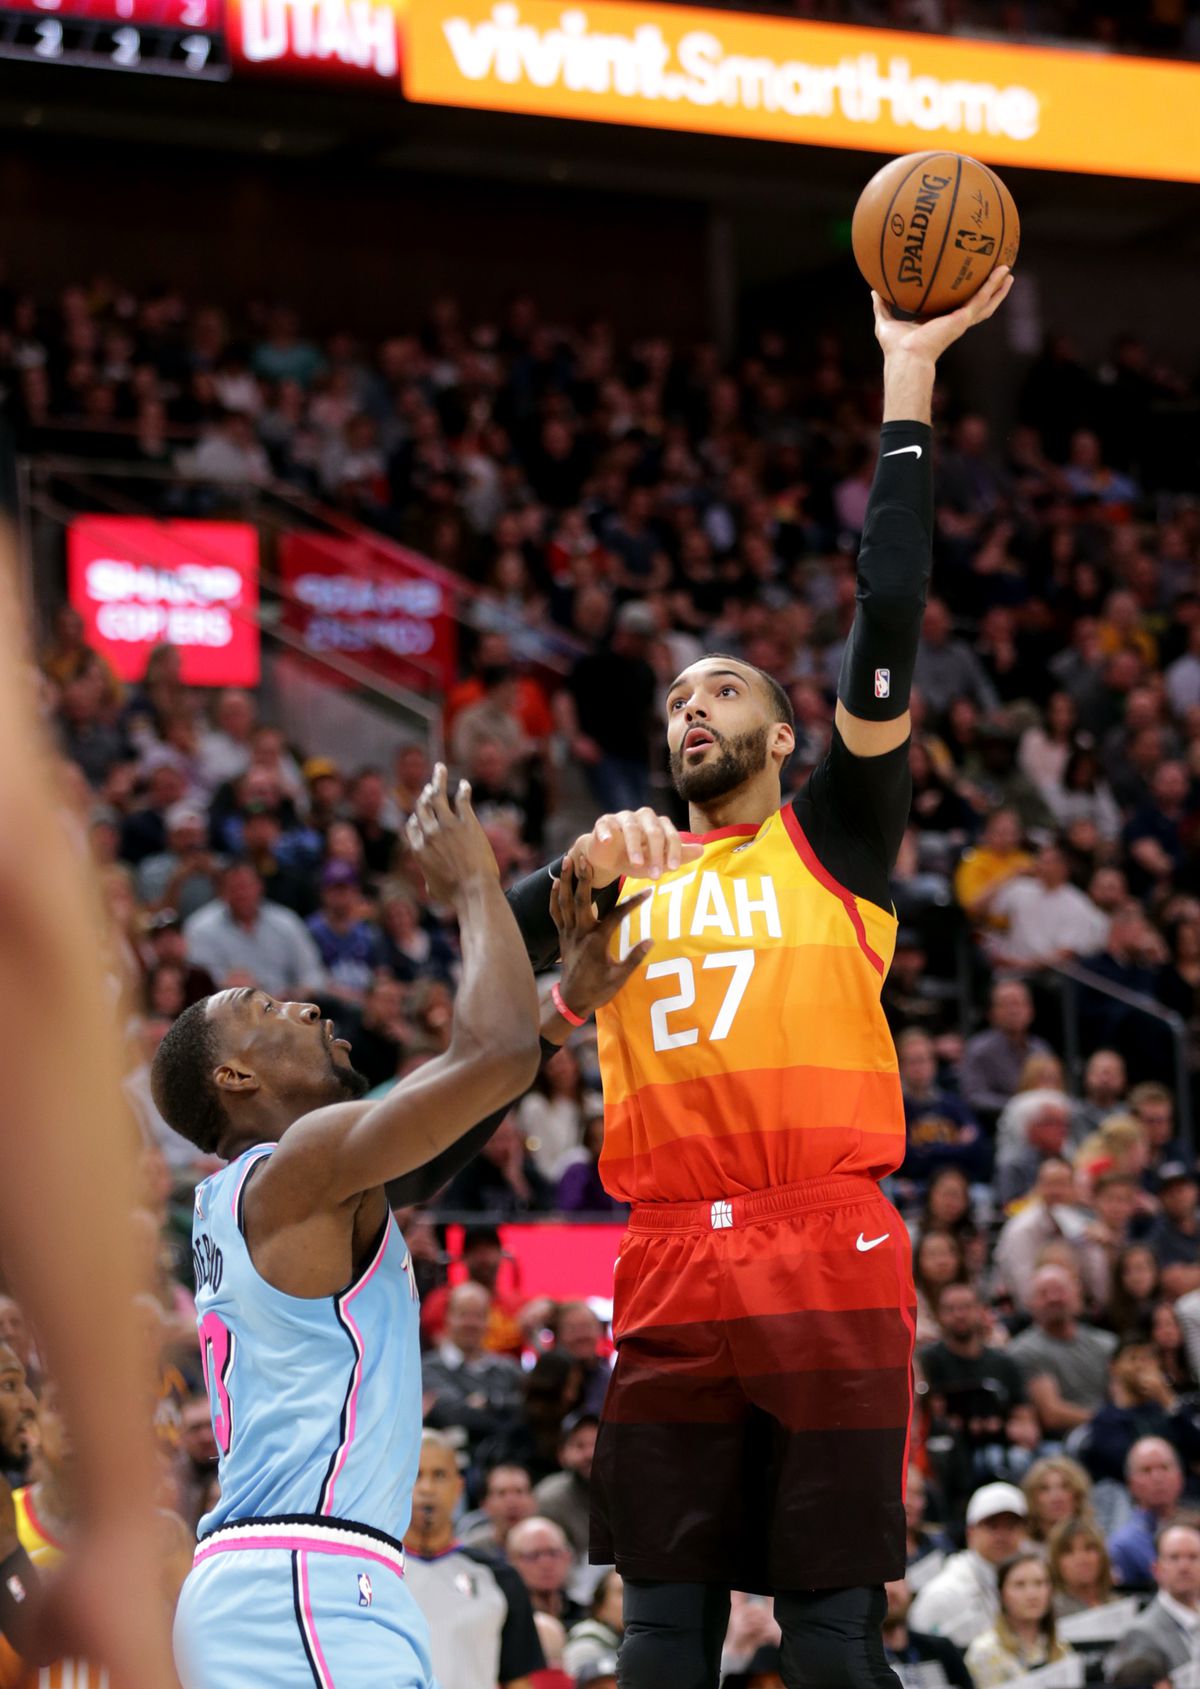 Utah Jazz center Rudy Gobert (27) pushes up a shot over Miami Heat forward Bam Adebayo (13) as the Utah Jazz and the Miami Heat play in an NBA basketball game at Vivint Smart Home Arena in Salt Lake City on Wednesday, Feb. 12, 2020.